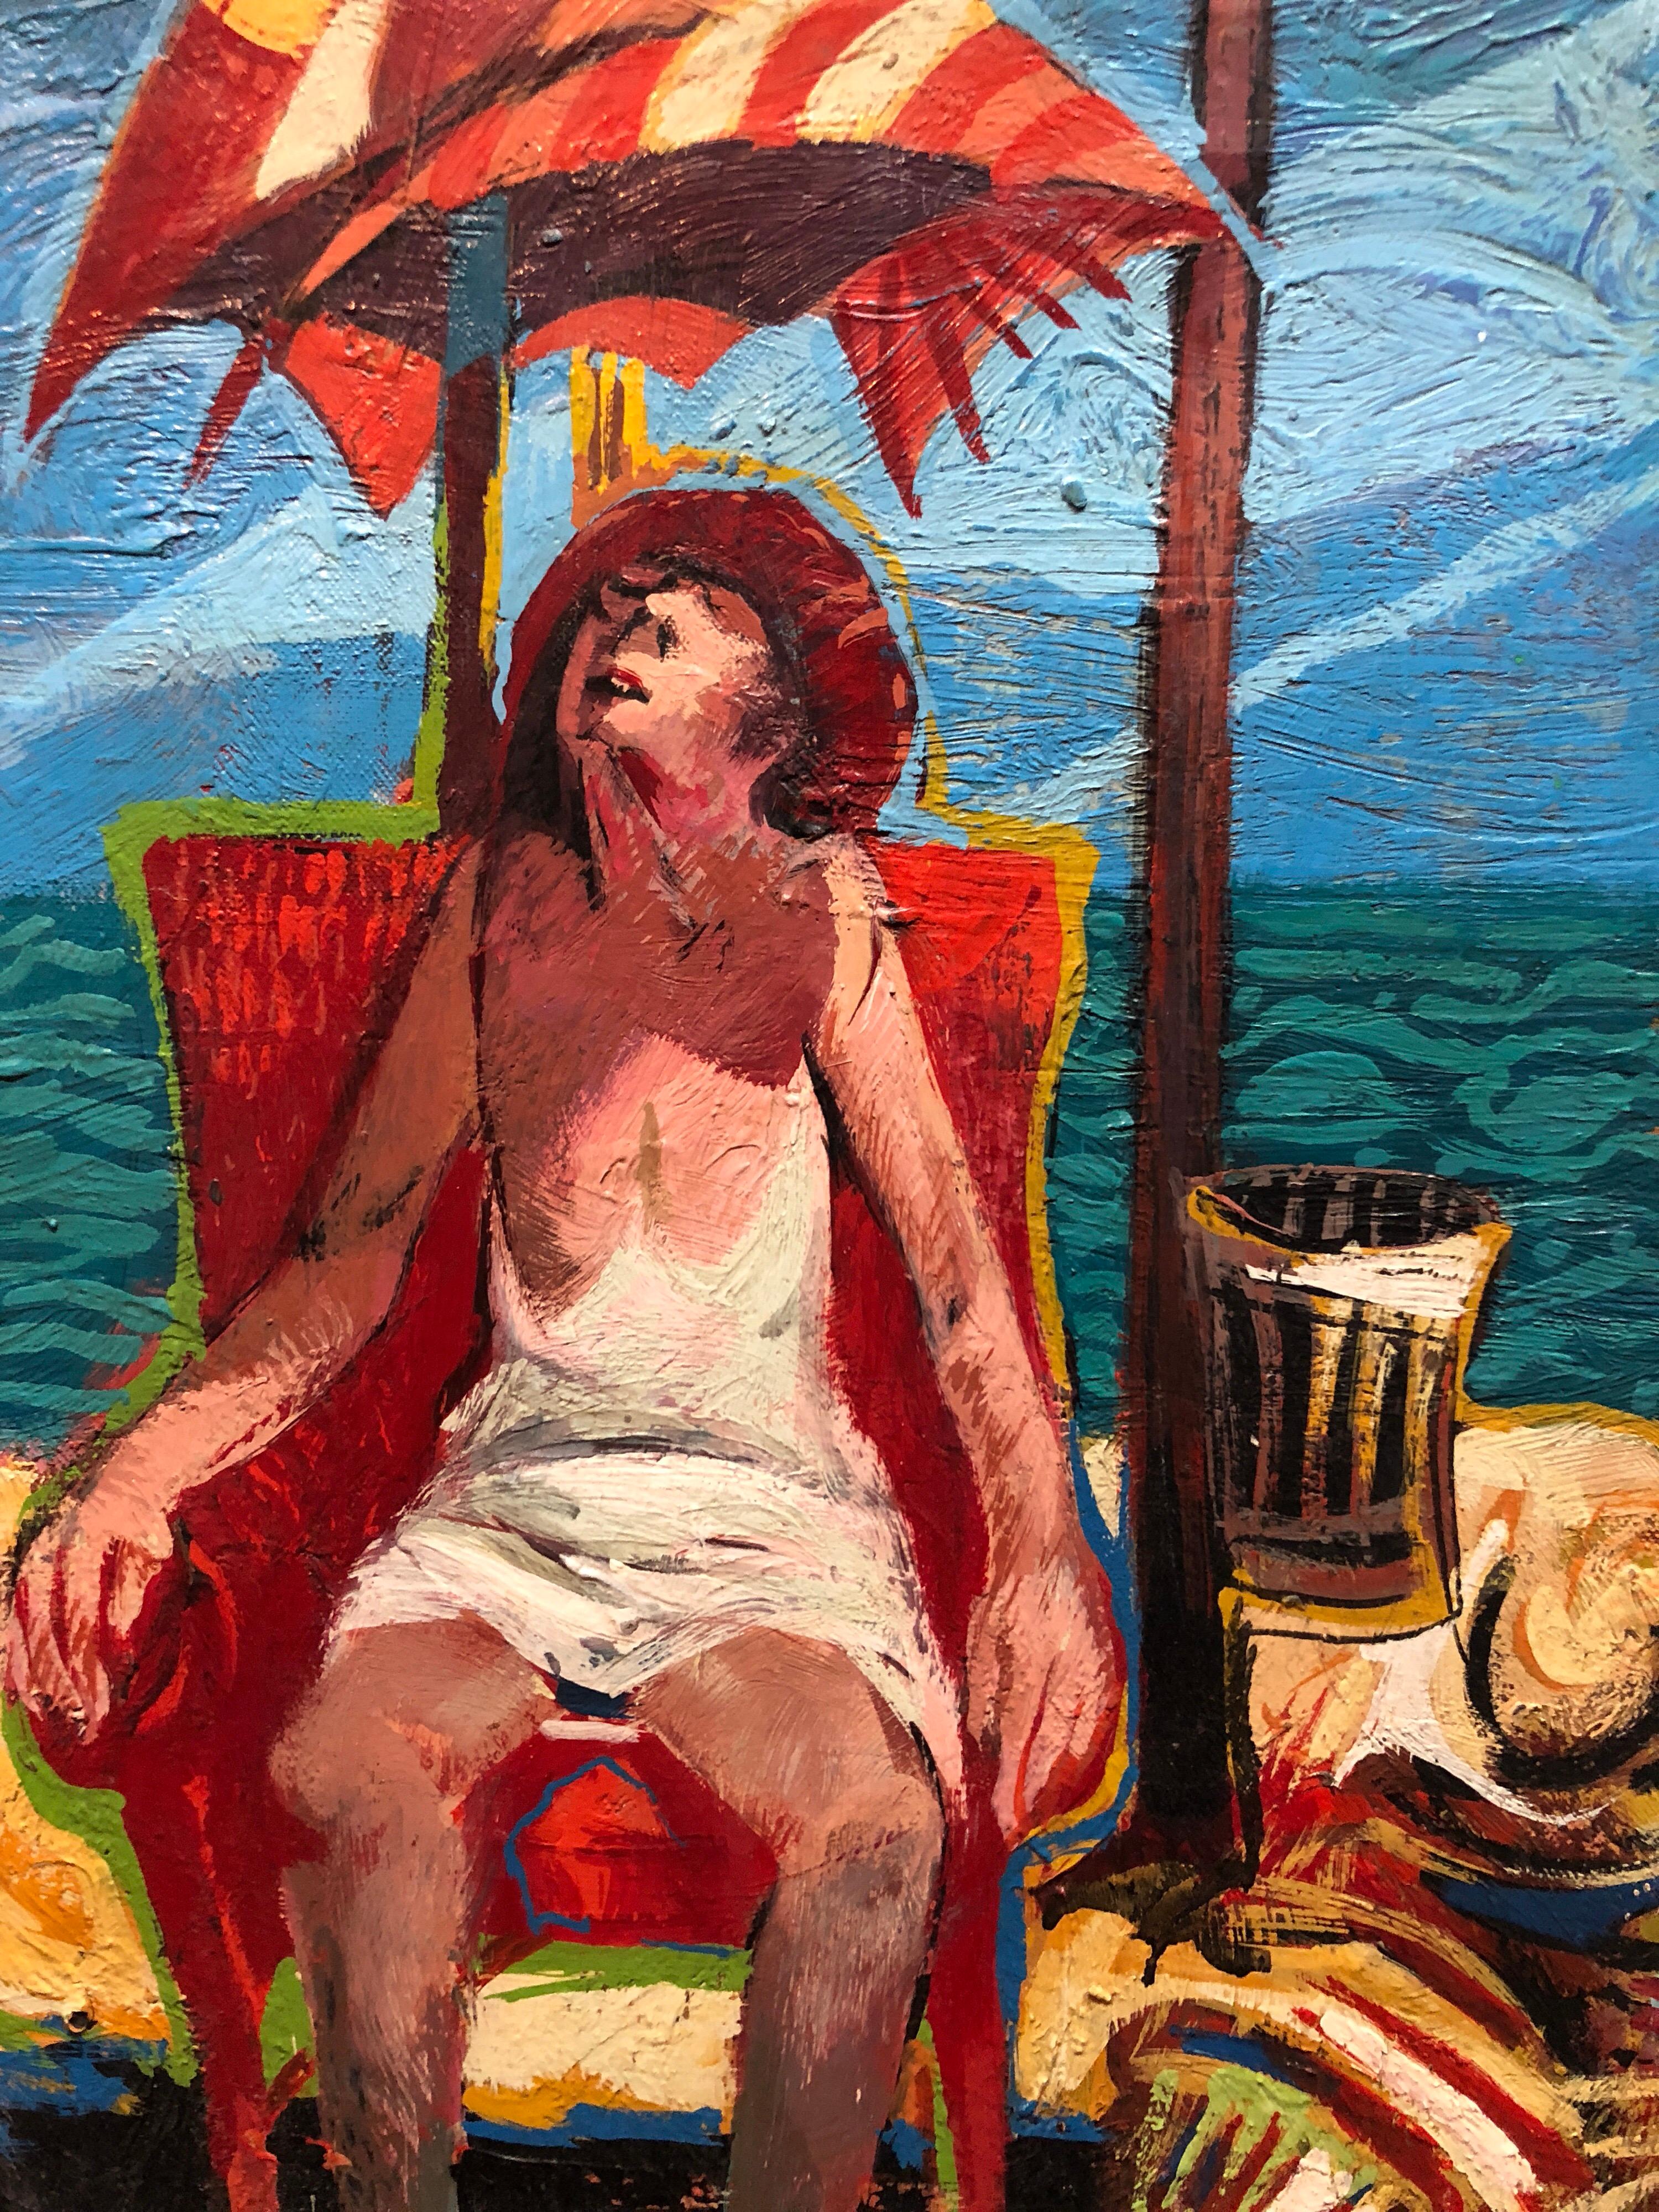 Woman in Chair Beach Scene Italian Modernist Oil Painting - Brown Figurative Painting by Getty Bisagni